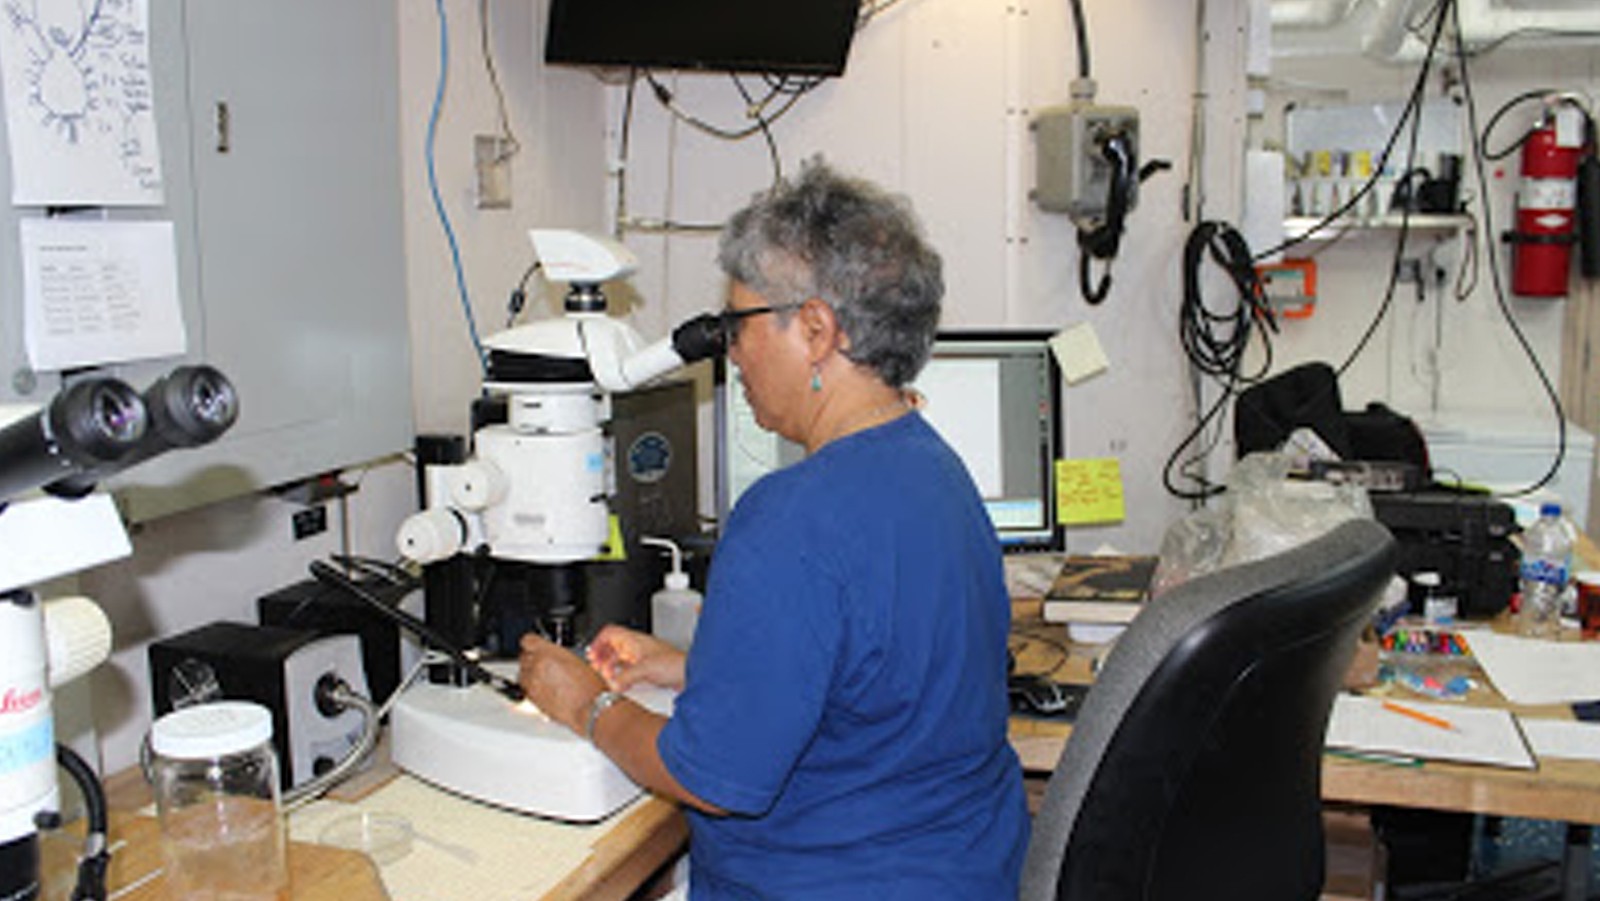 Scientists working aboard the Nancy Foster research ship. Image credit: NOAA